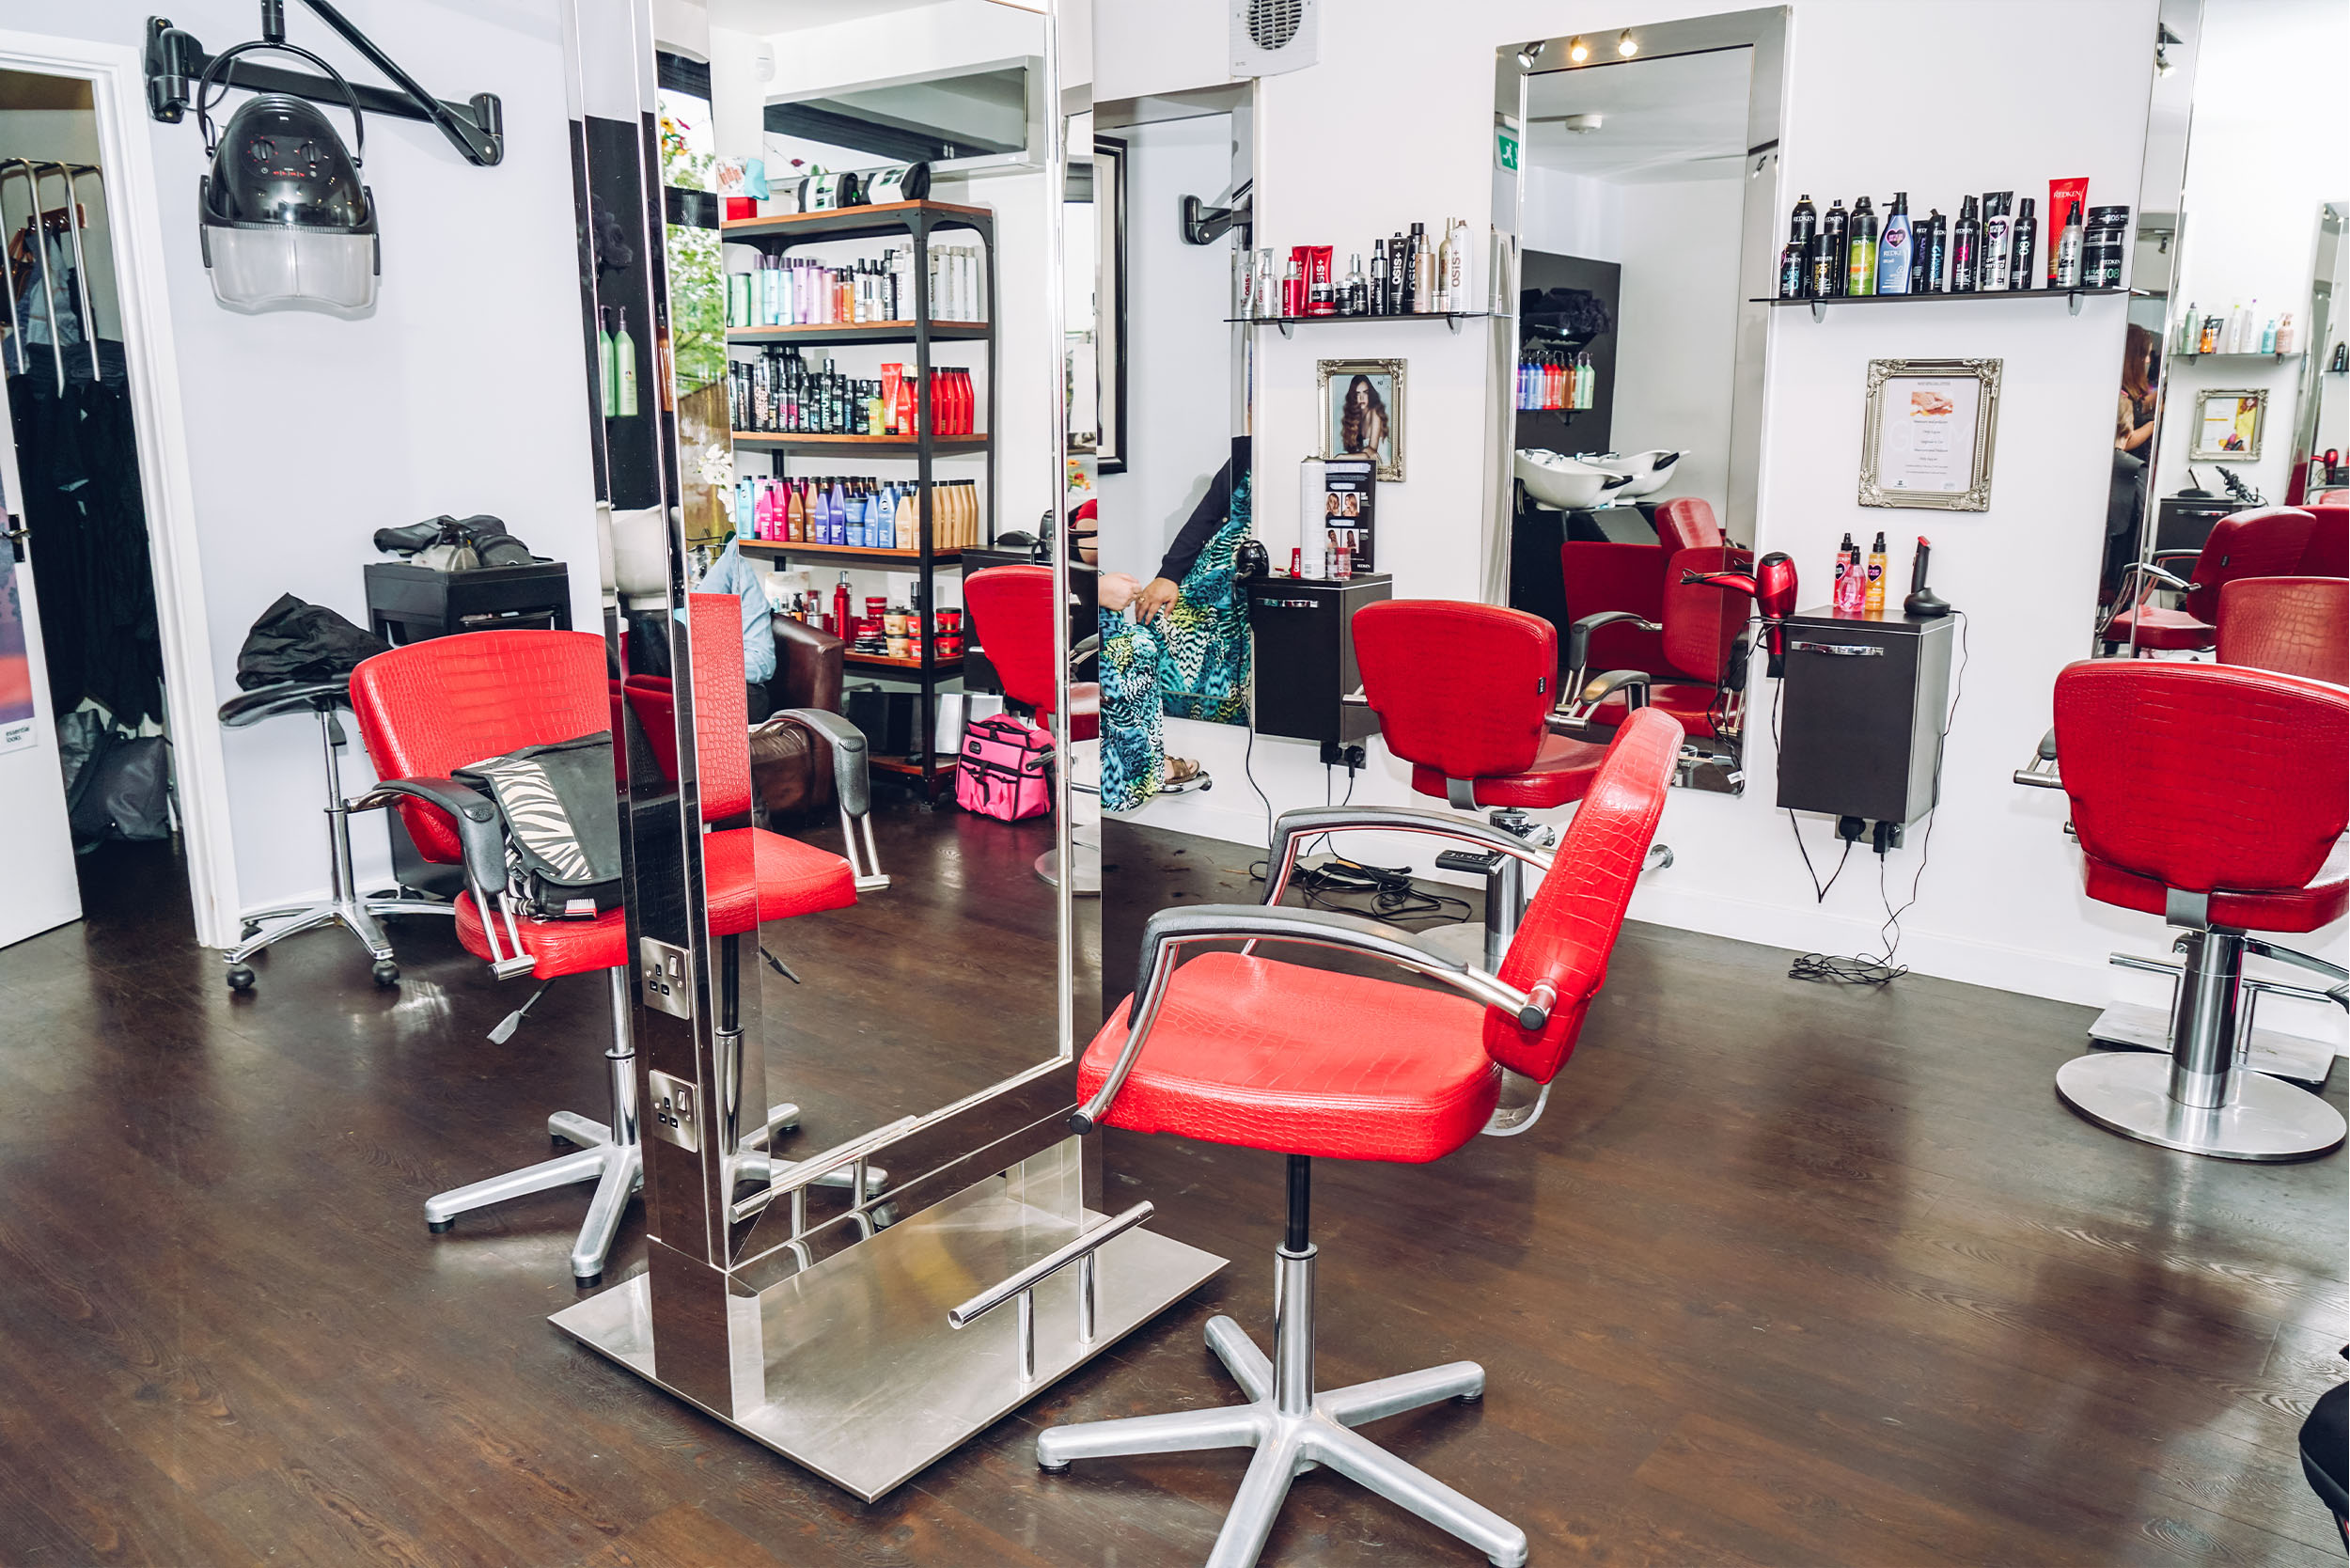 Million Dollar Facials, Blow Dries and Massages - Our Trip to Wendy's Salon  — Colchester Streets | Professional Photographer